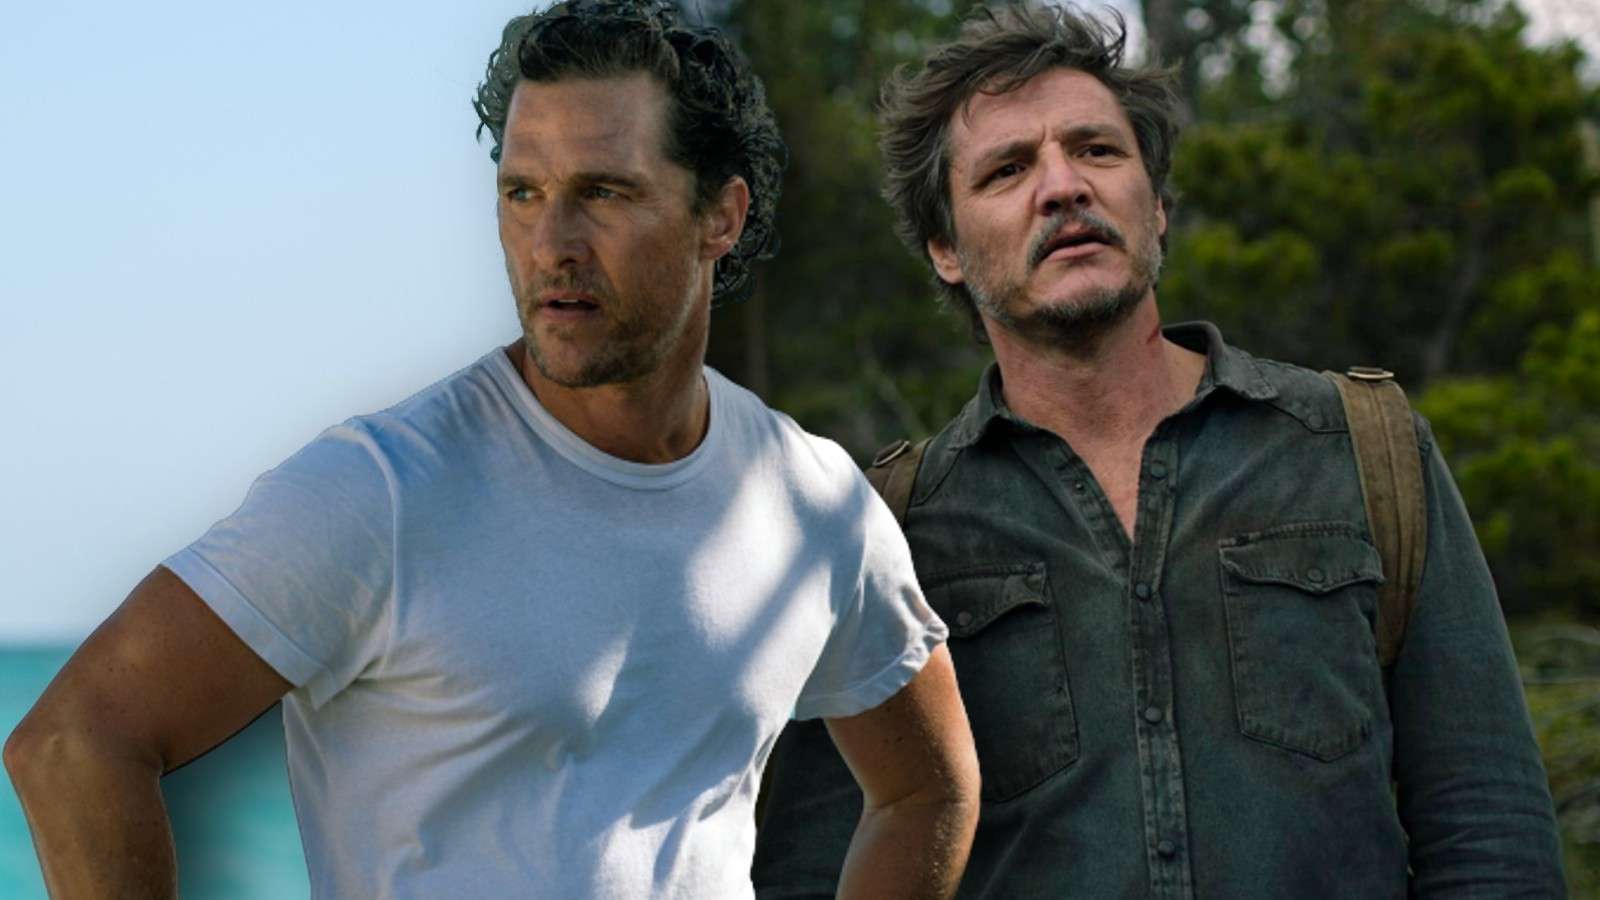 Matthew McConaughey and Pedro Pascal as Joel in The Last of Us